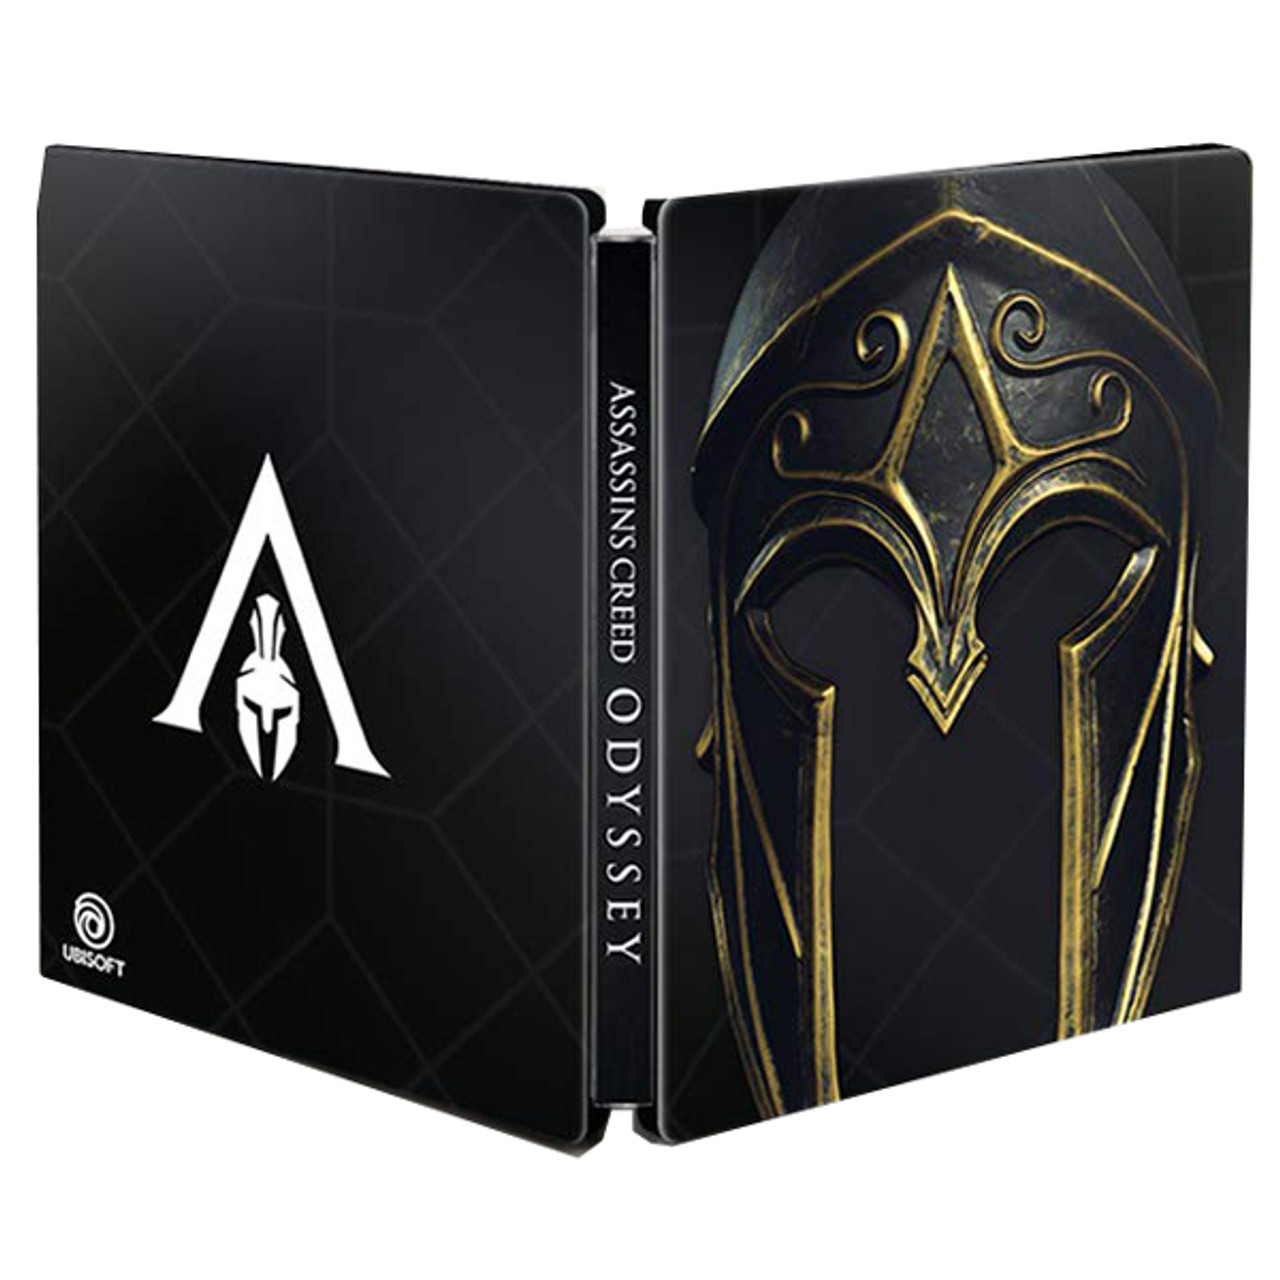 Buy Assassin's Creed Odyssey (Xbox ONE / Xbox Series X|S) Microsoft Store